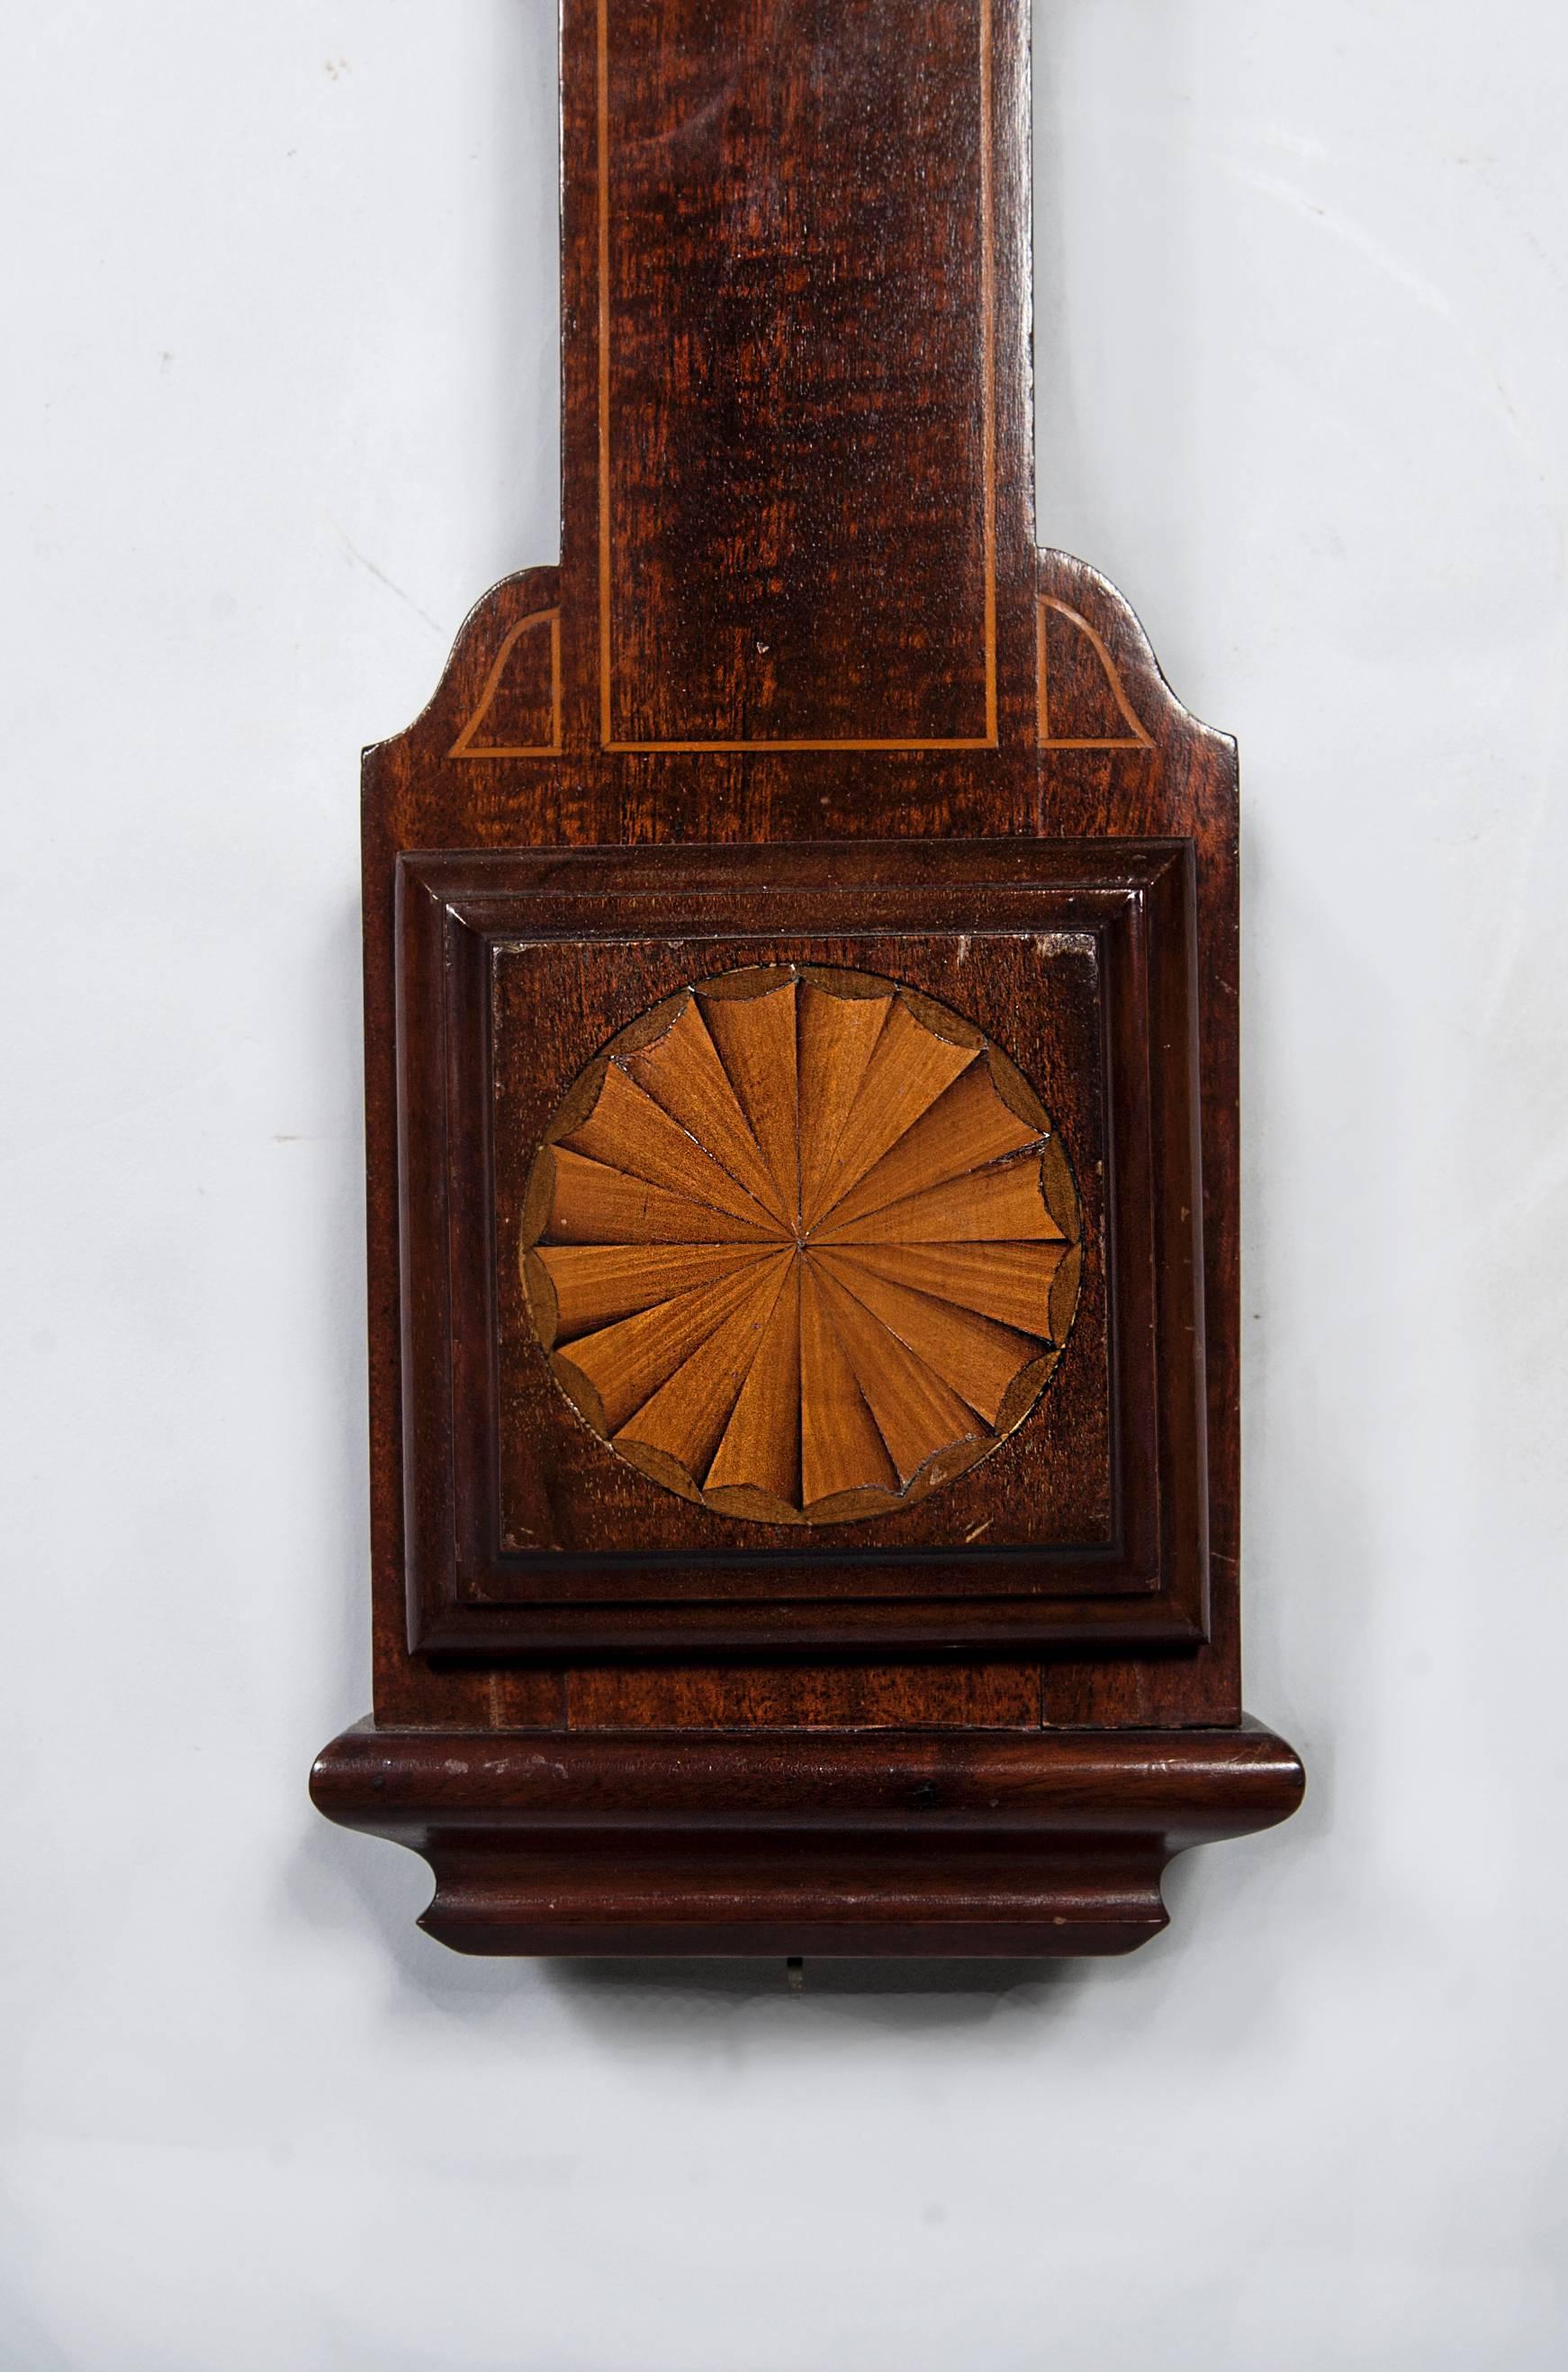 A good English mahogany marquetry inlaid stick barometer, J. Hicks London
bone scales with double vernier, mahogany inlaid case with the thermometer.

Concealed tube with bone scales signed J. Hicks London with double vernier, an arched mahogany